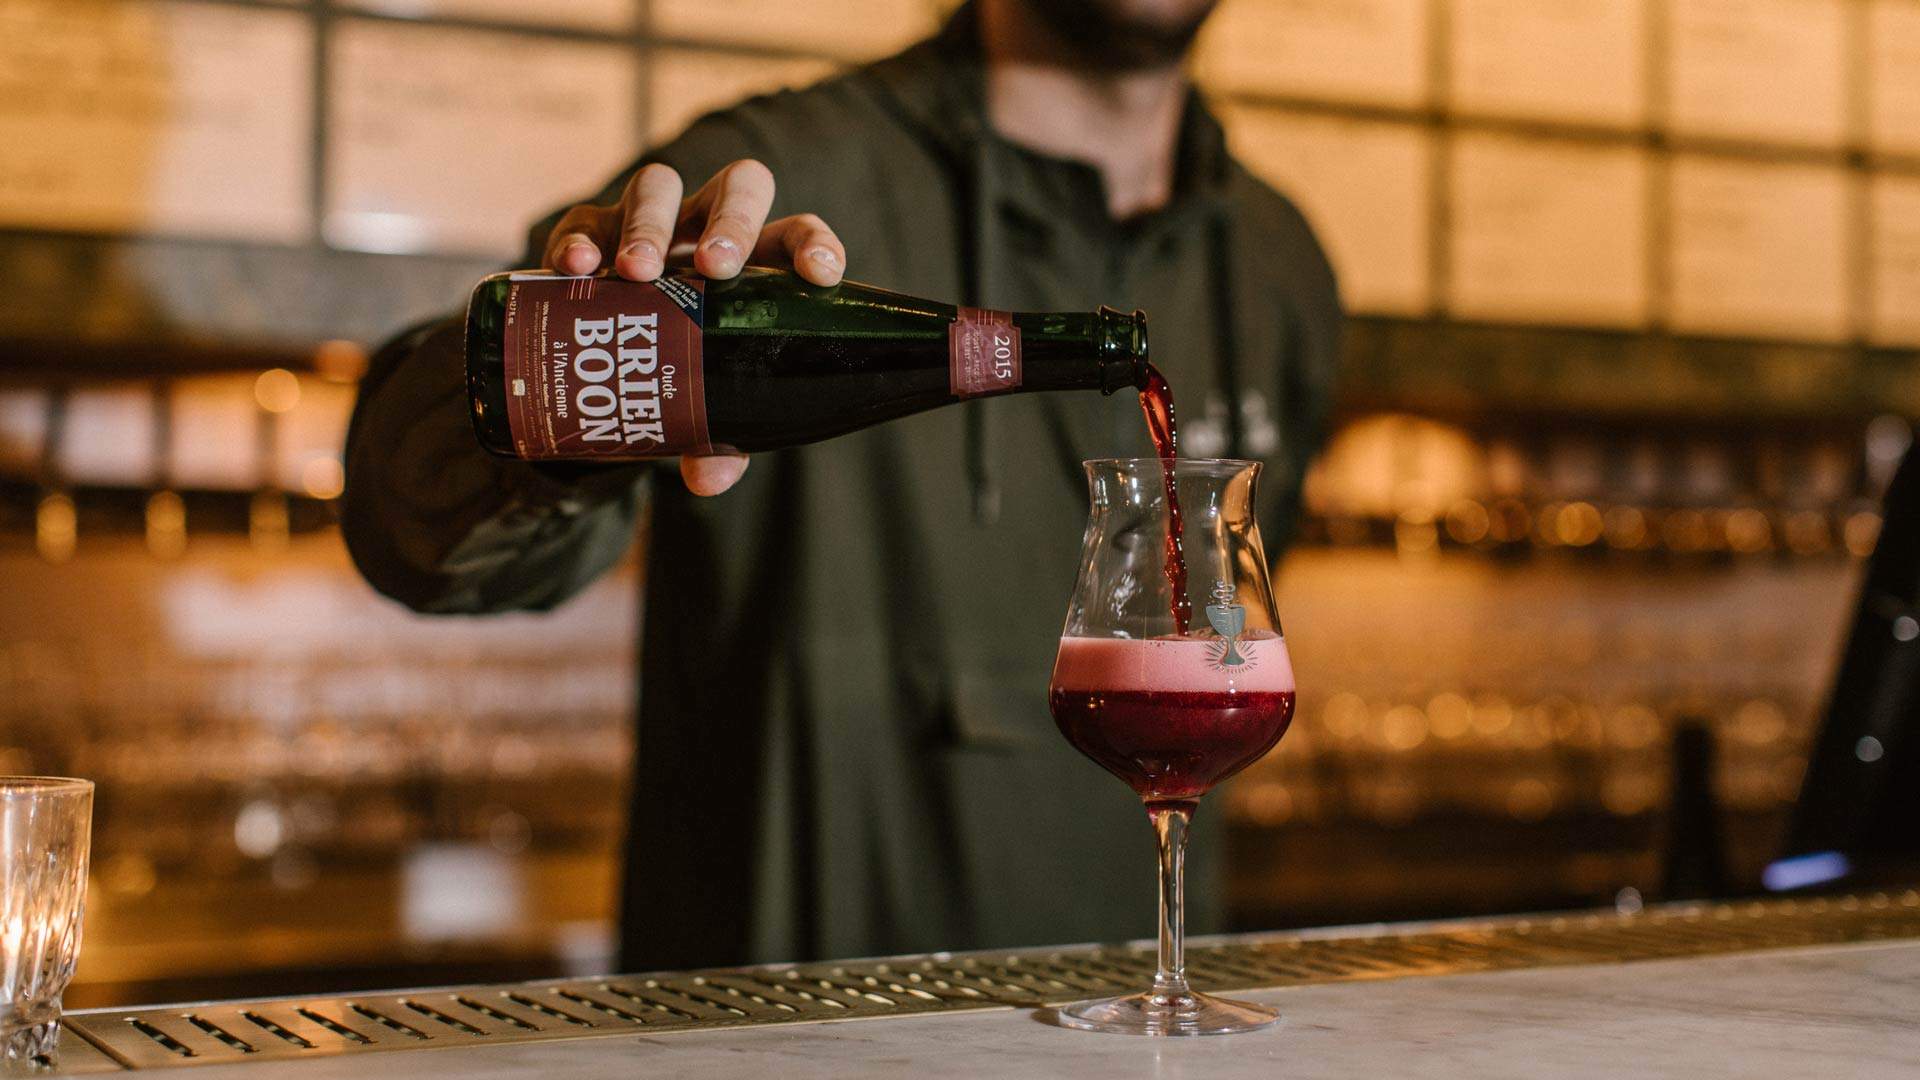 Odd Culture Is Darlinghurst's New Sour Ale and Natural Wine Bar